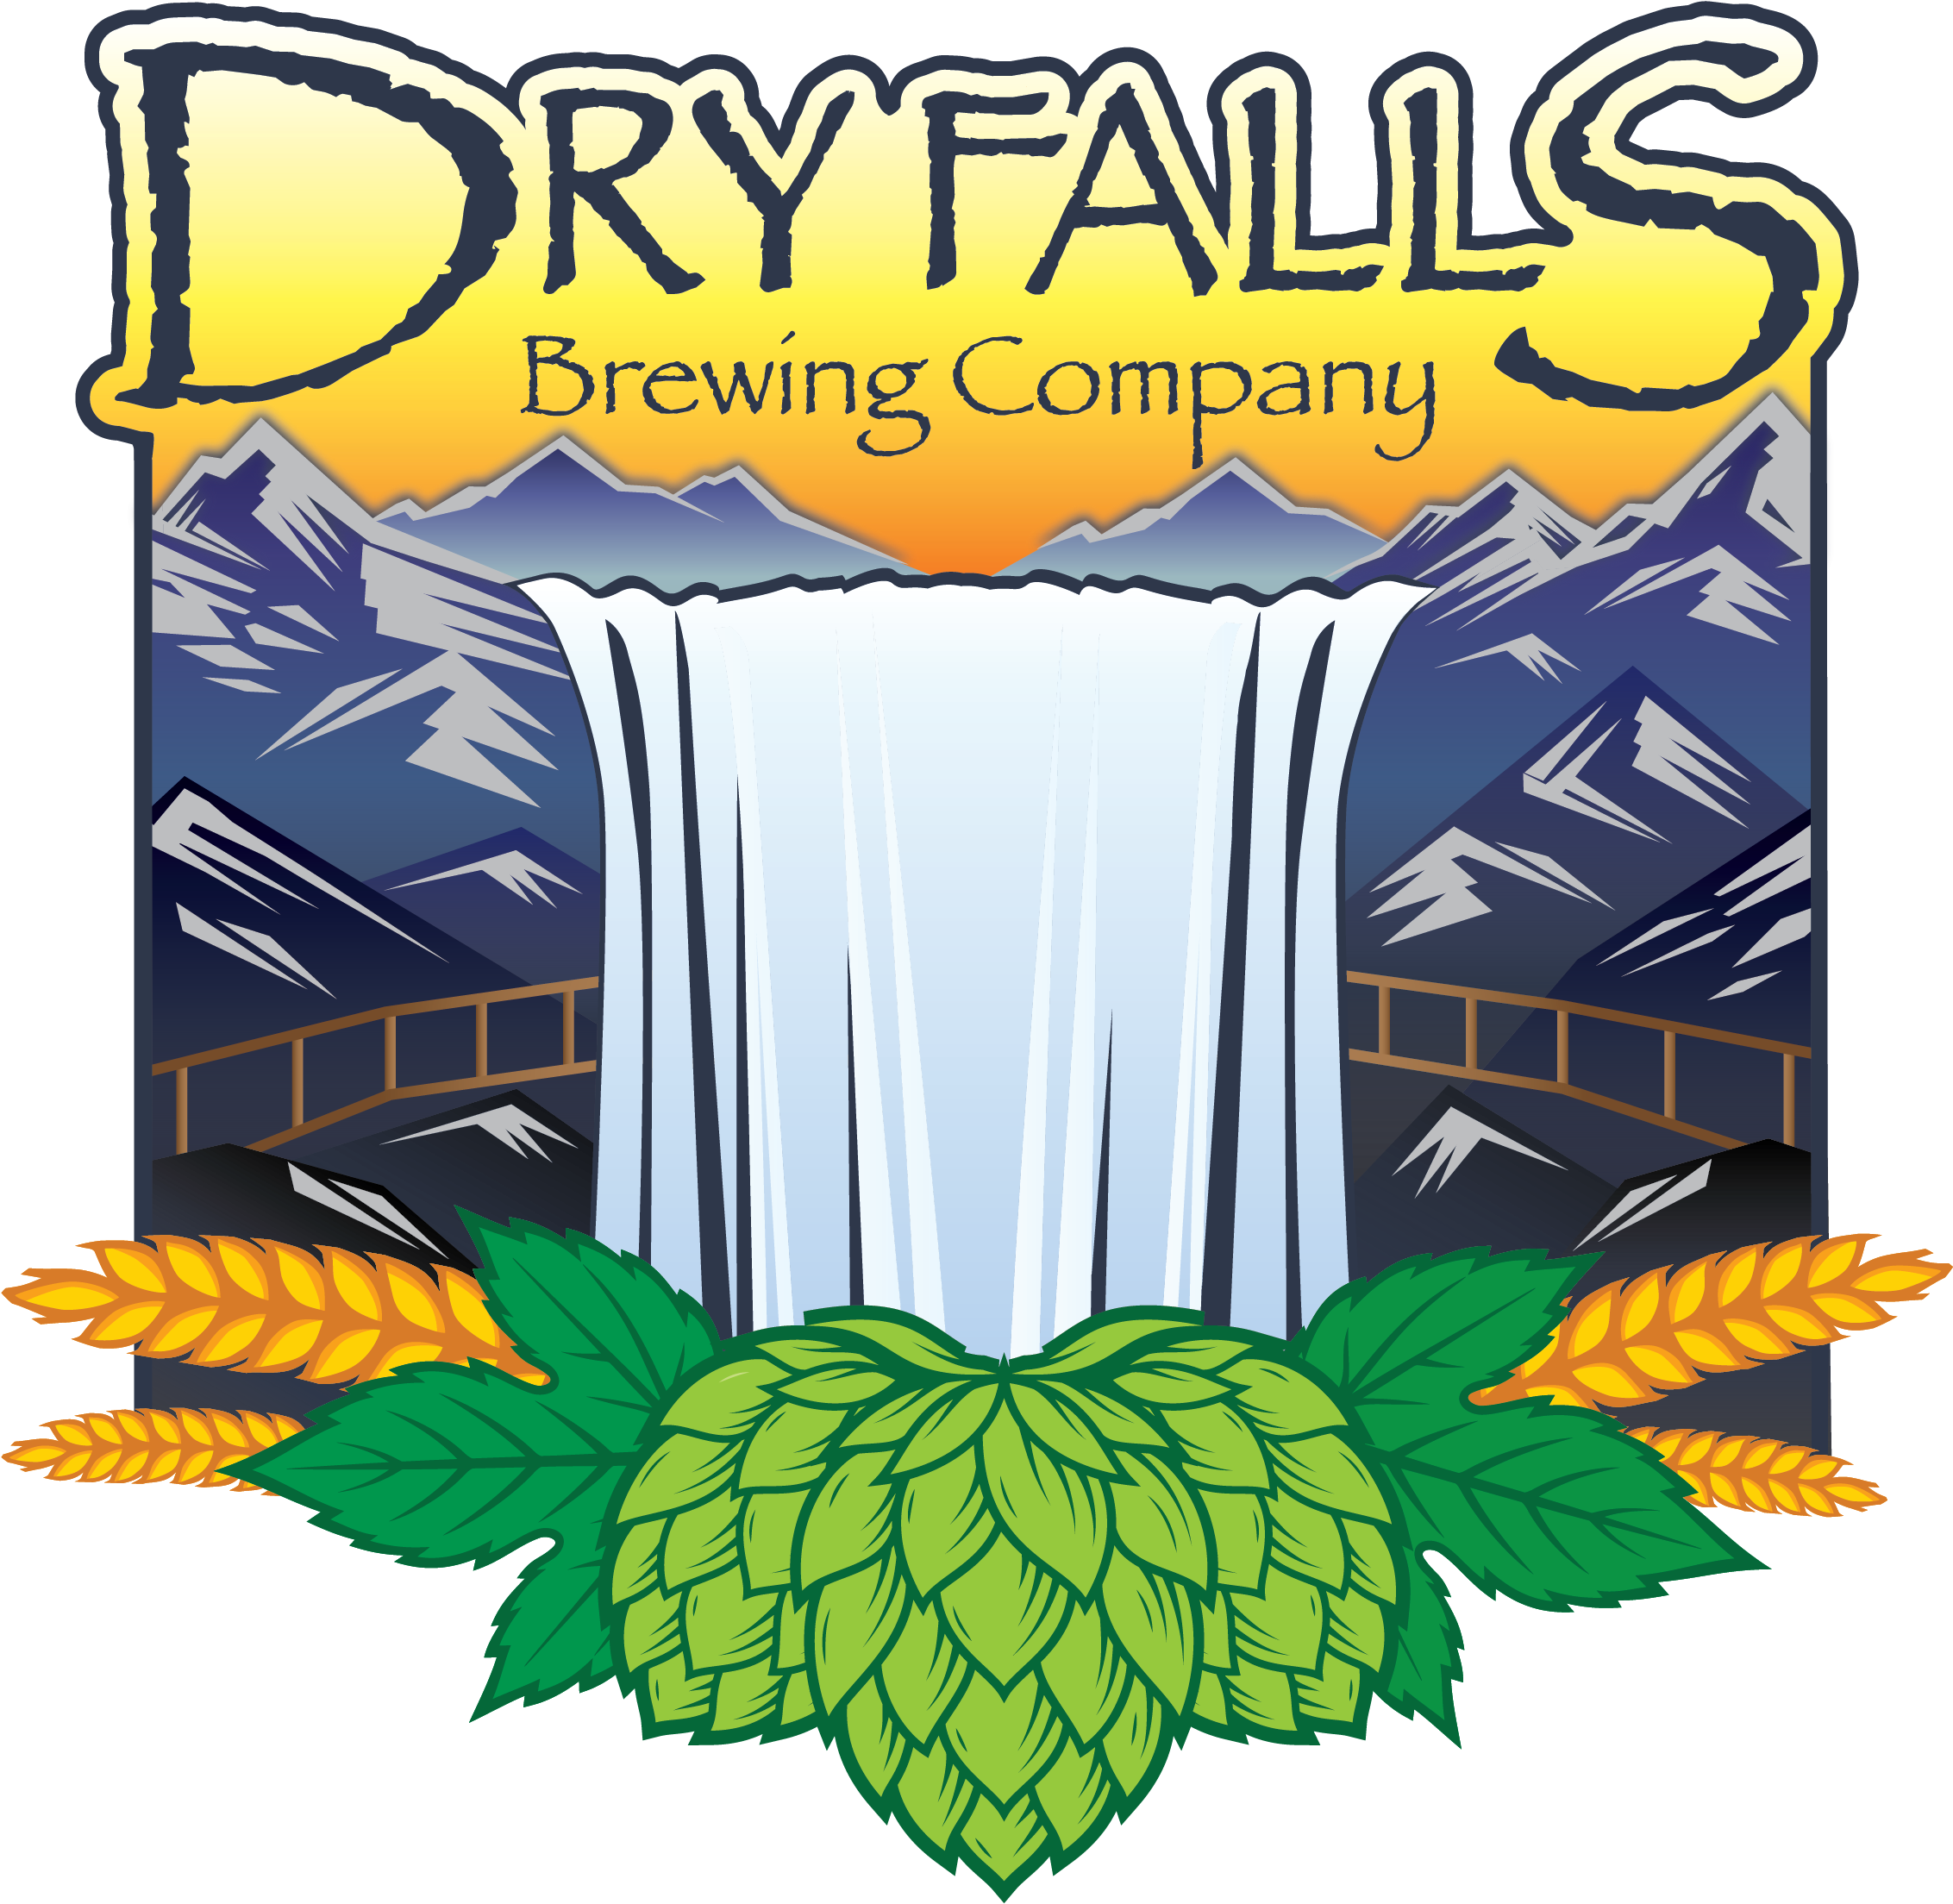 Dry Falls Brewing Co - Poster (2401x2400)